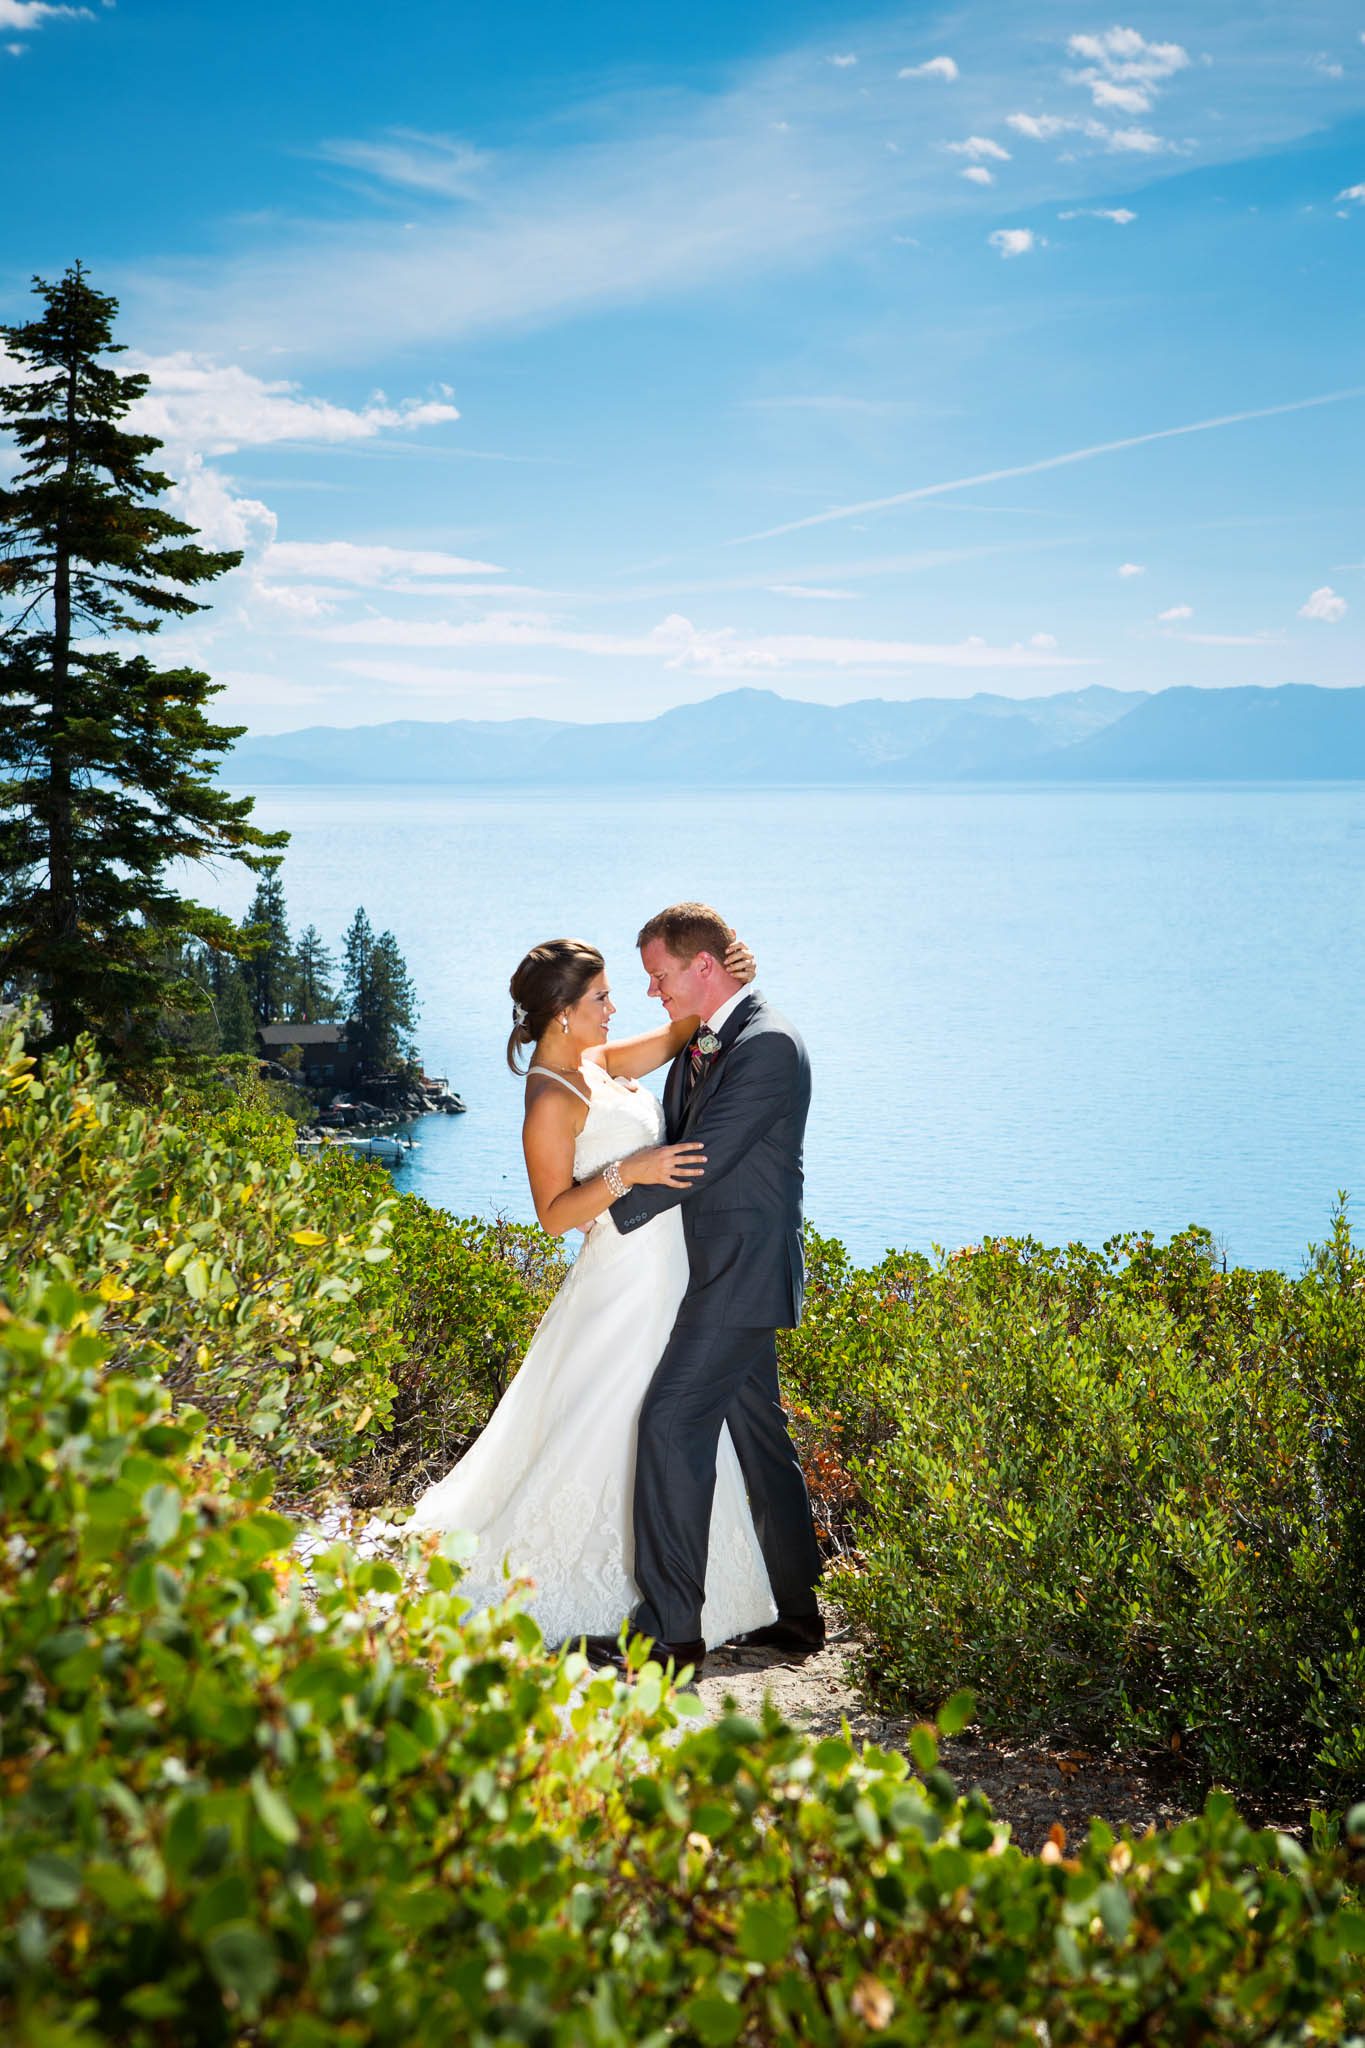 briode and groom portrait – North Lake Tahoe Incline Village wedding photography